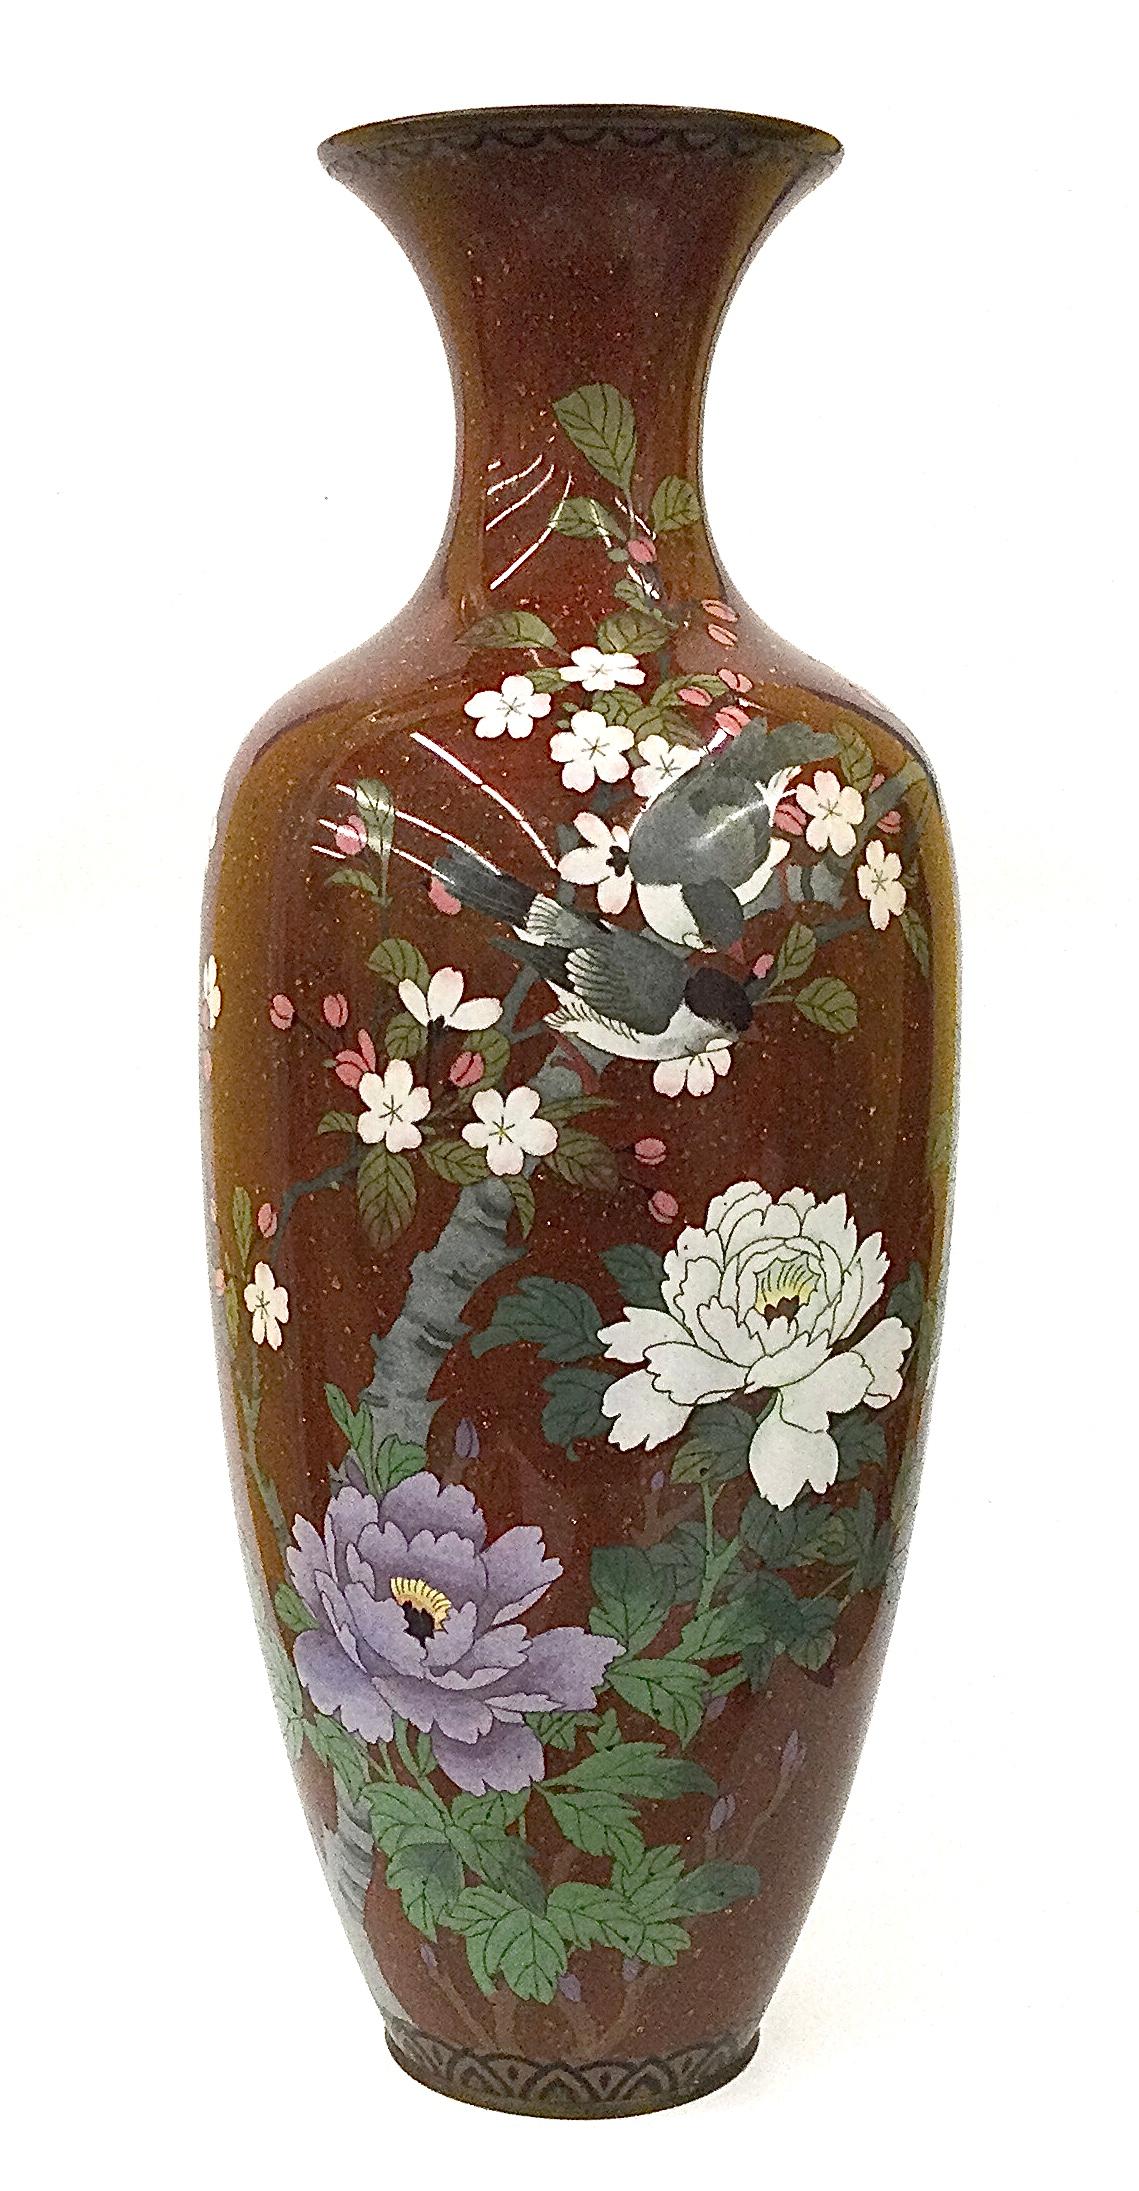 Meiji Period amazing Japanese Cloisonne vase. 

Meiji Period
(1868-1912). The reign of Emperor Meiji and the beginning of Japan's modern period. It started on October 23, 1868, when the 16-year-old emperor Mutsuhito selected the era name 